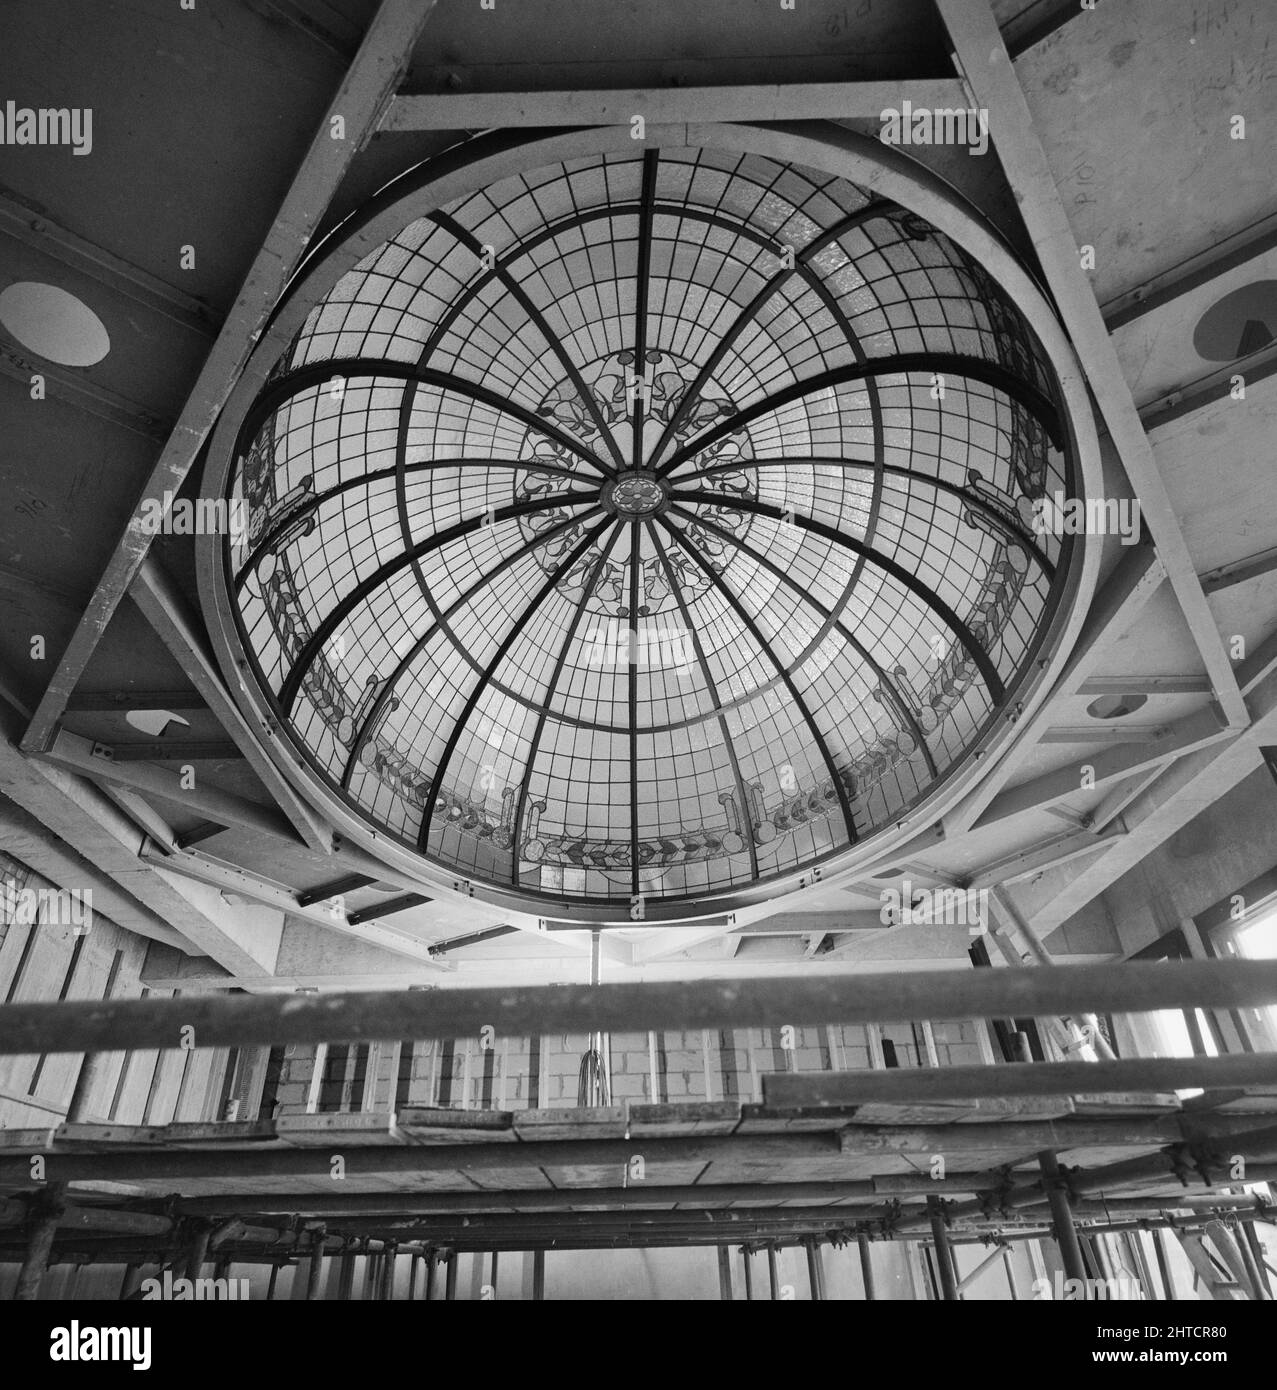 Unity House, Euston Road, Camden, London, 29/09/1982. A view of an original leaded glass domed skylight in the boardroom at Unity House, seen during the installation of interior fittings. The contract for the new &#xa3;4.5 million headquarters for the National Union of Railwaymen at Euston Road was awarded to Laing&#x2019;s London Region. The new headquarters were built on the site of the former Unity House, which had been the home of the National Union of Railwaymen since 1910. Some features of the old building were incorporated into its modern counterpart, including the boardroom&#x2019;s le Stock Photo